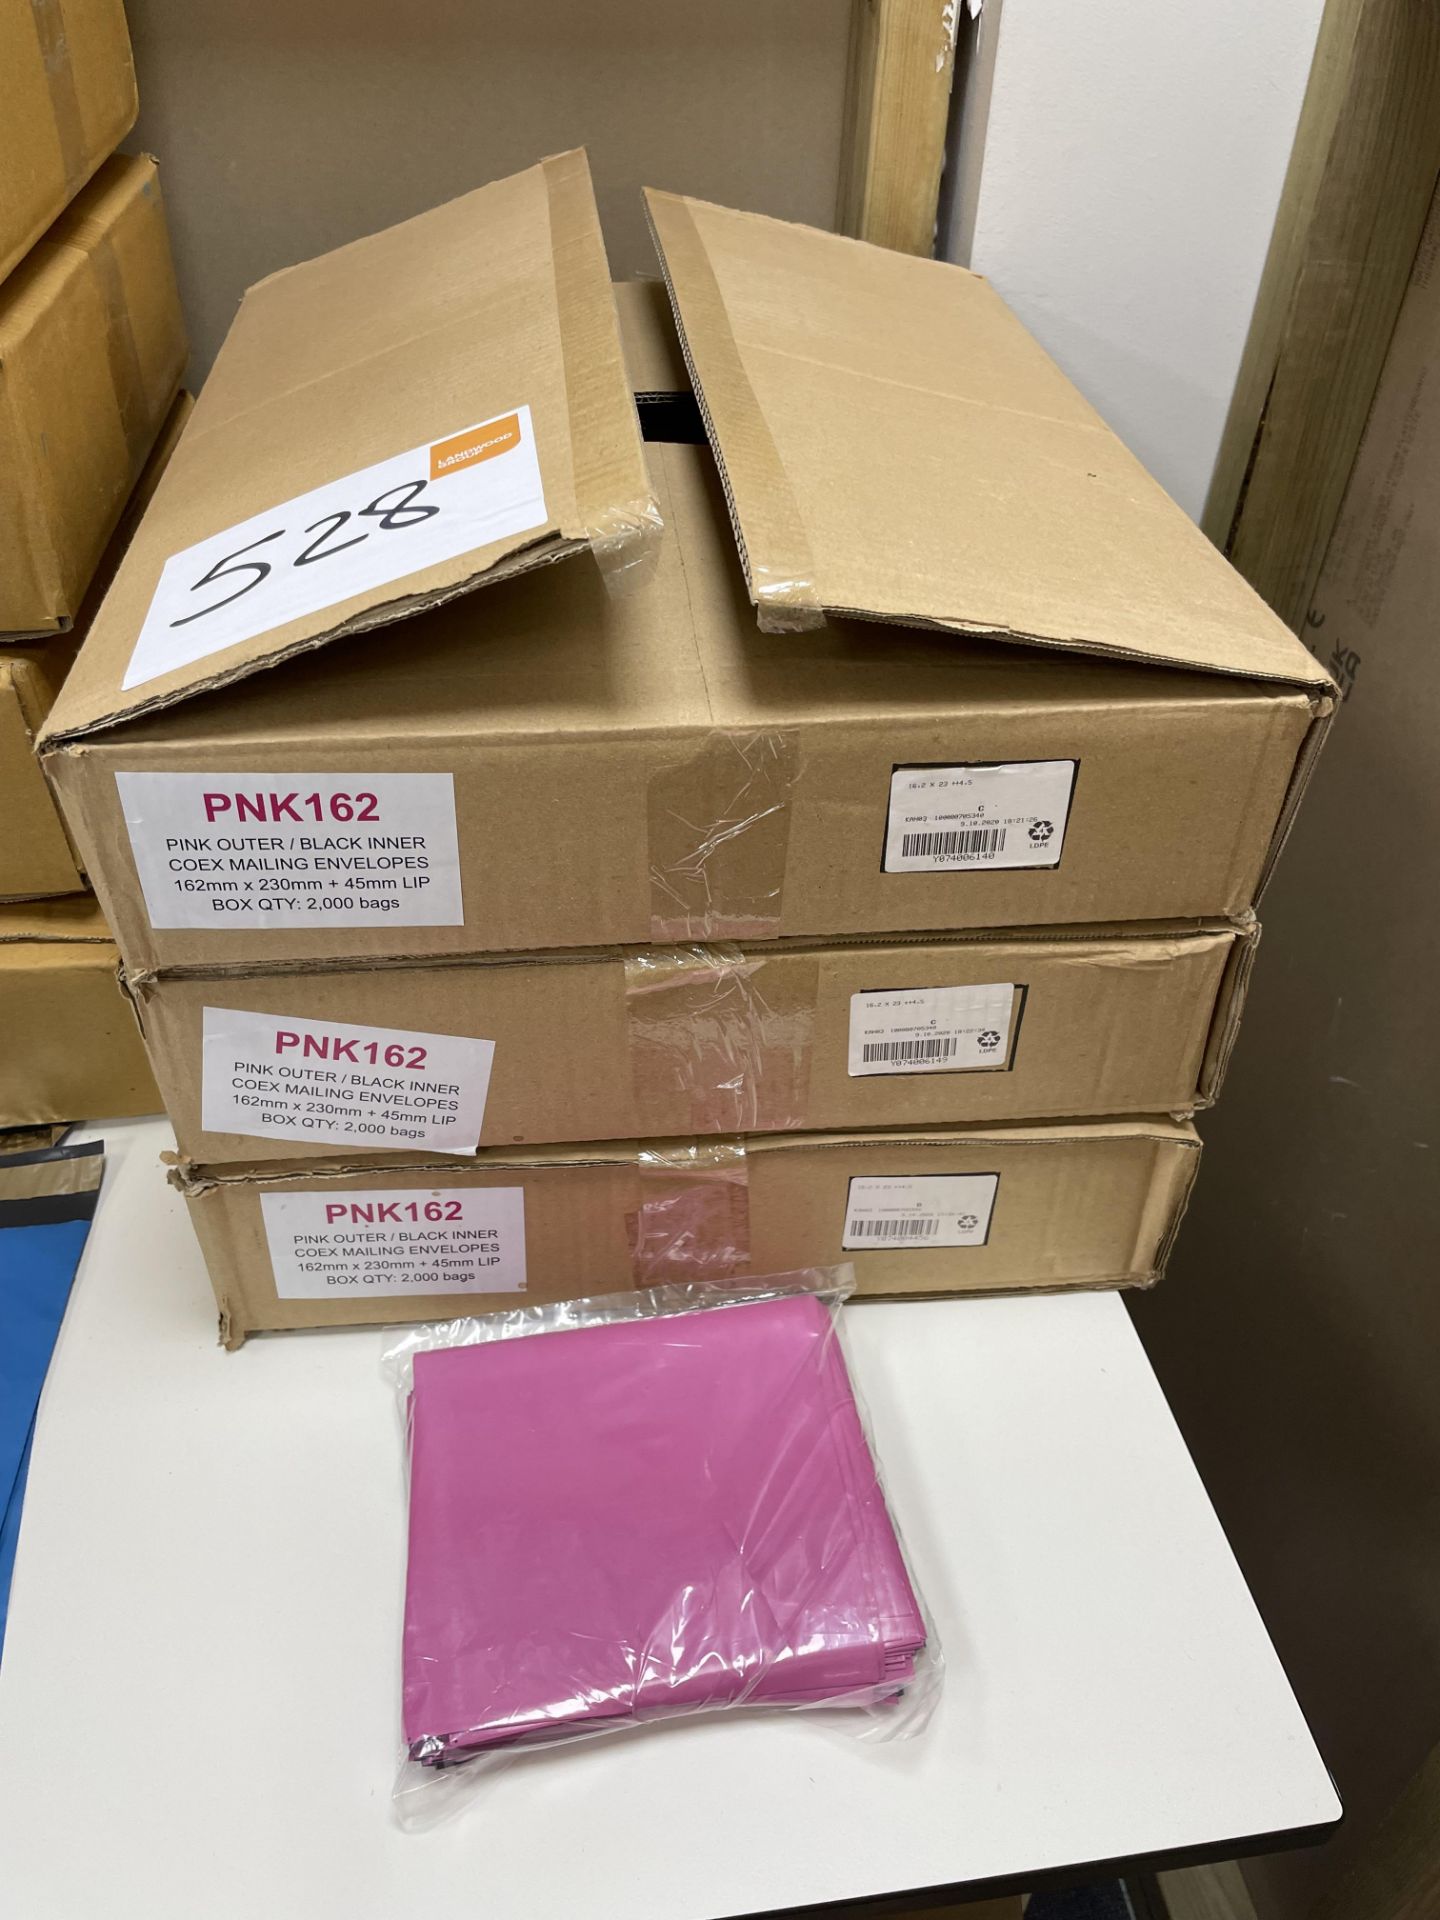 3 boxes of 2000 PNK 162 pink outer/black inner Coex mailing bags, 162mm x 230cm + 45mm LIP.